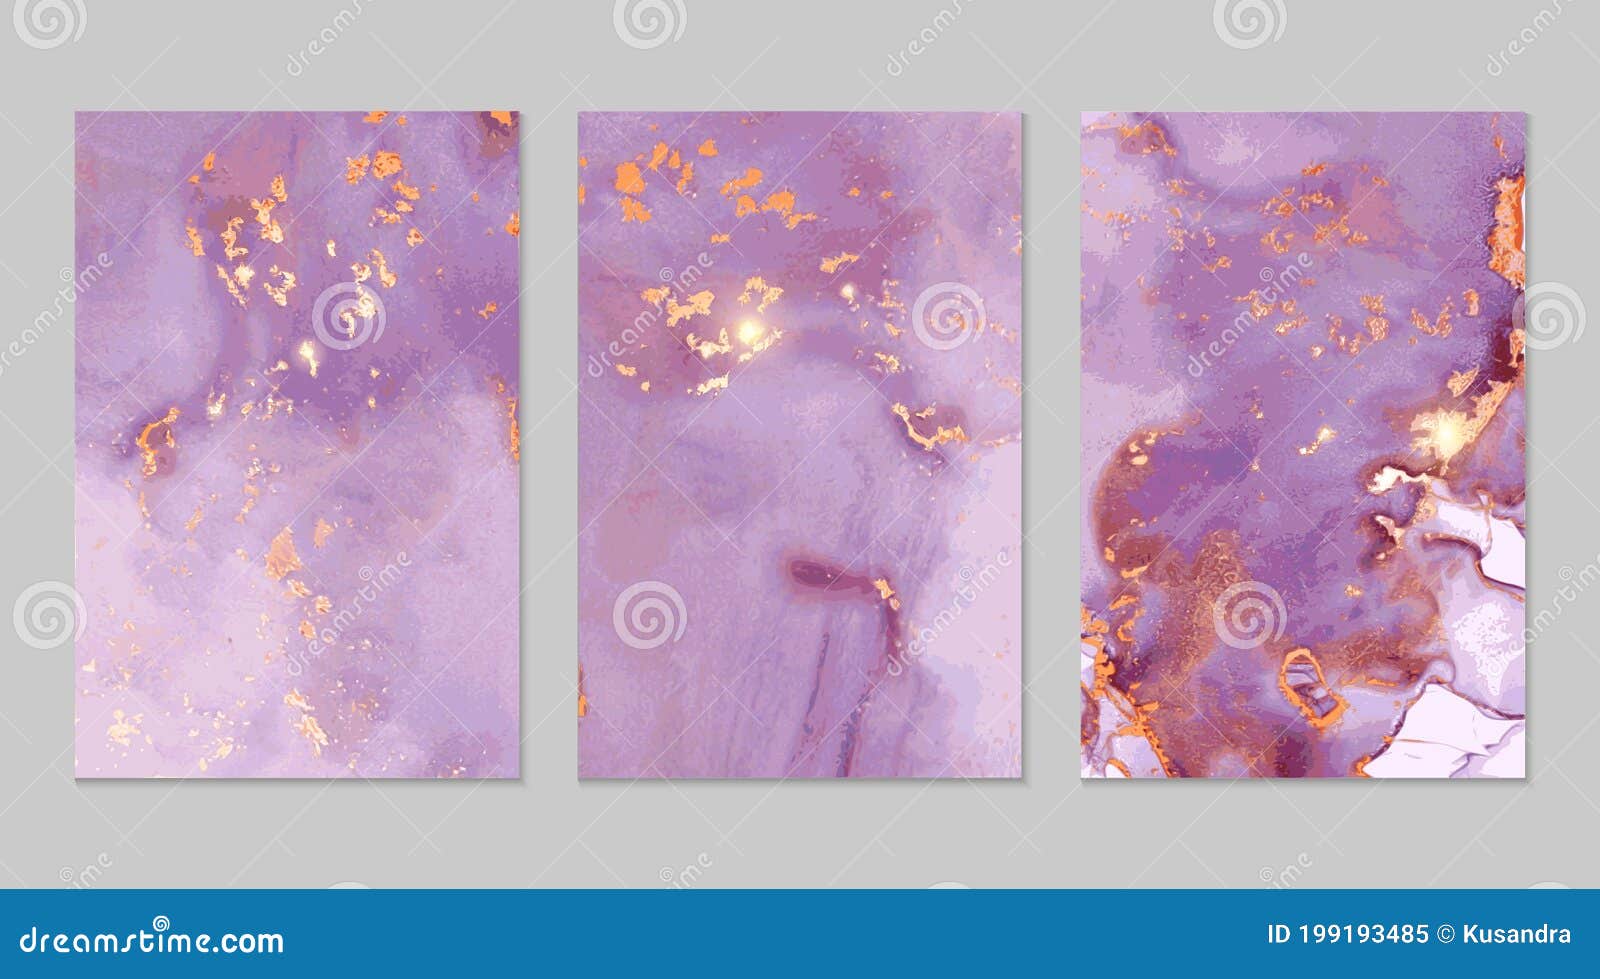 Pink, Purple and Gold Marble Abstract Backgrounds in Alcohol Ink ...